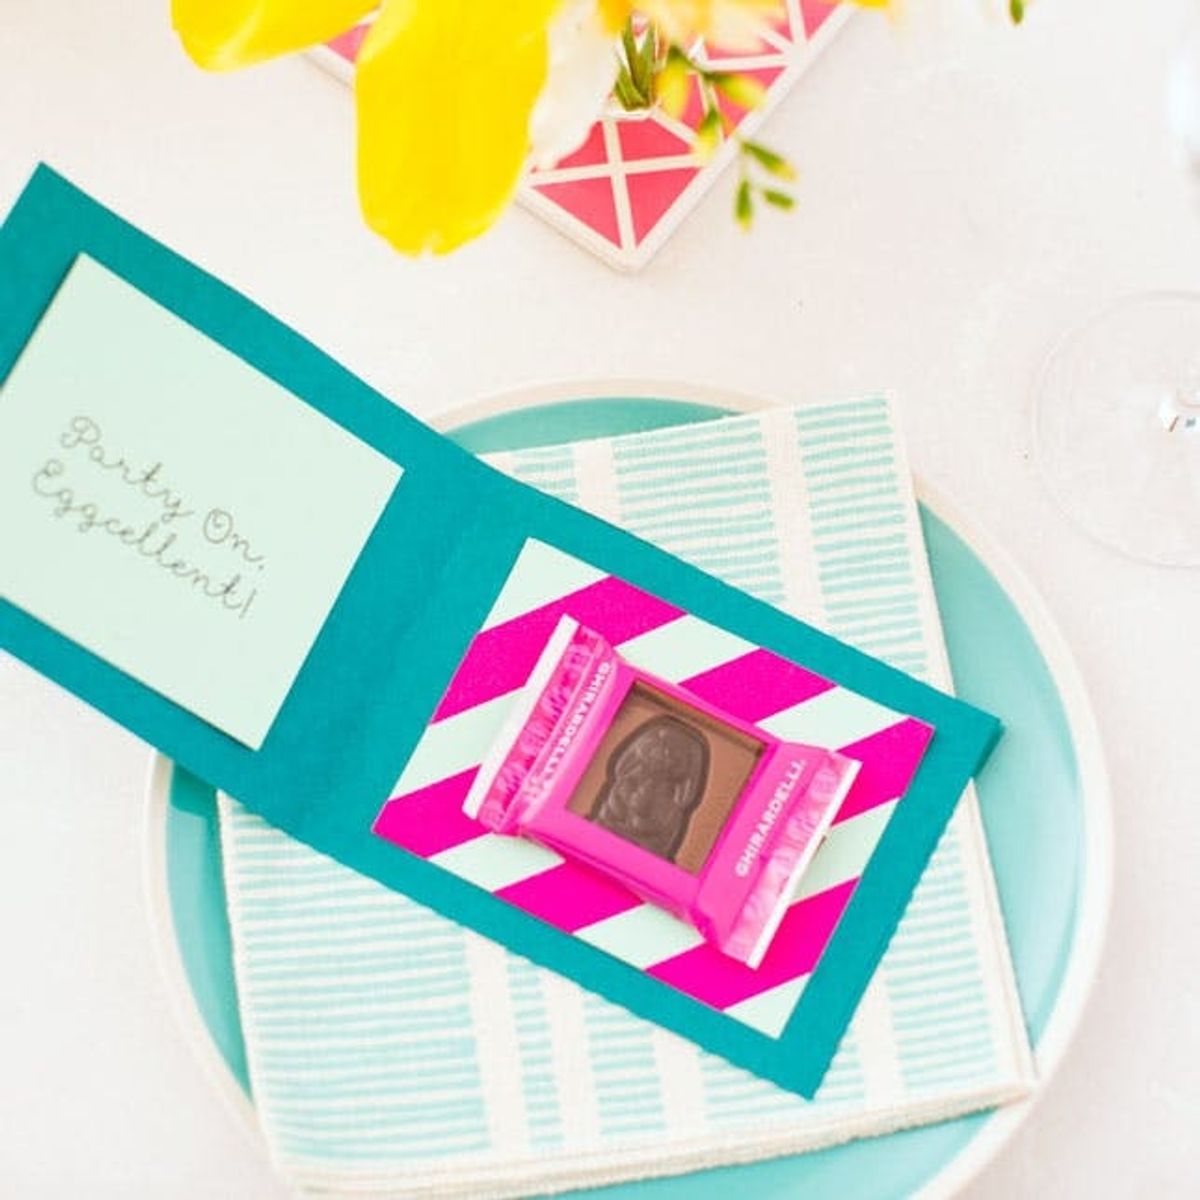 Make These Easter Brunch Place Cards in Under 5 Minutes